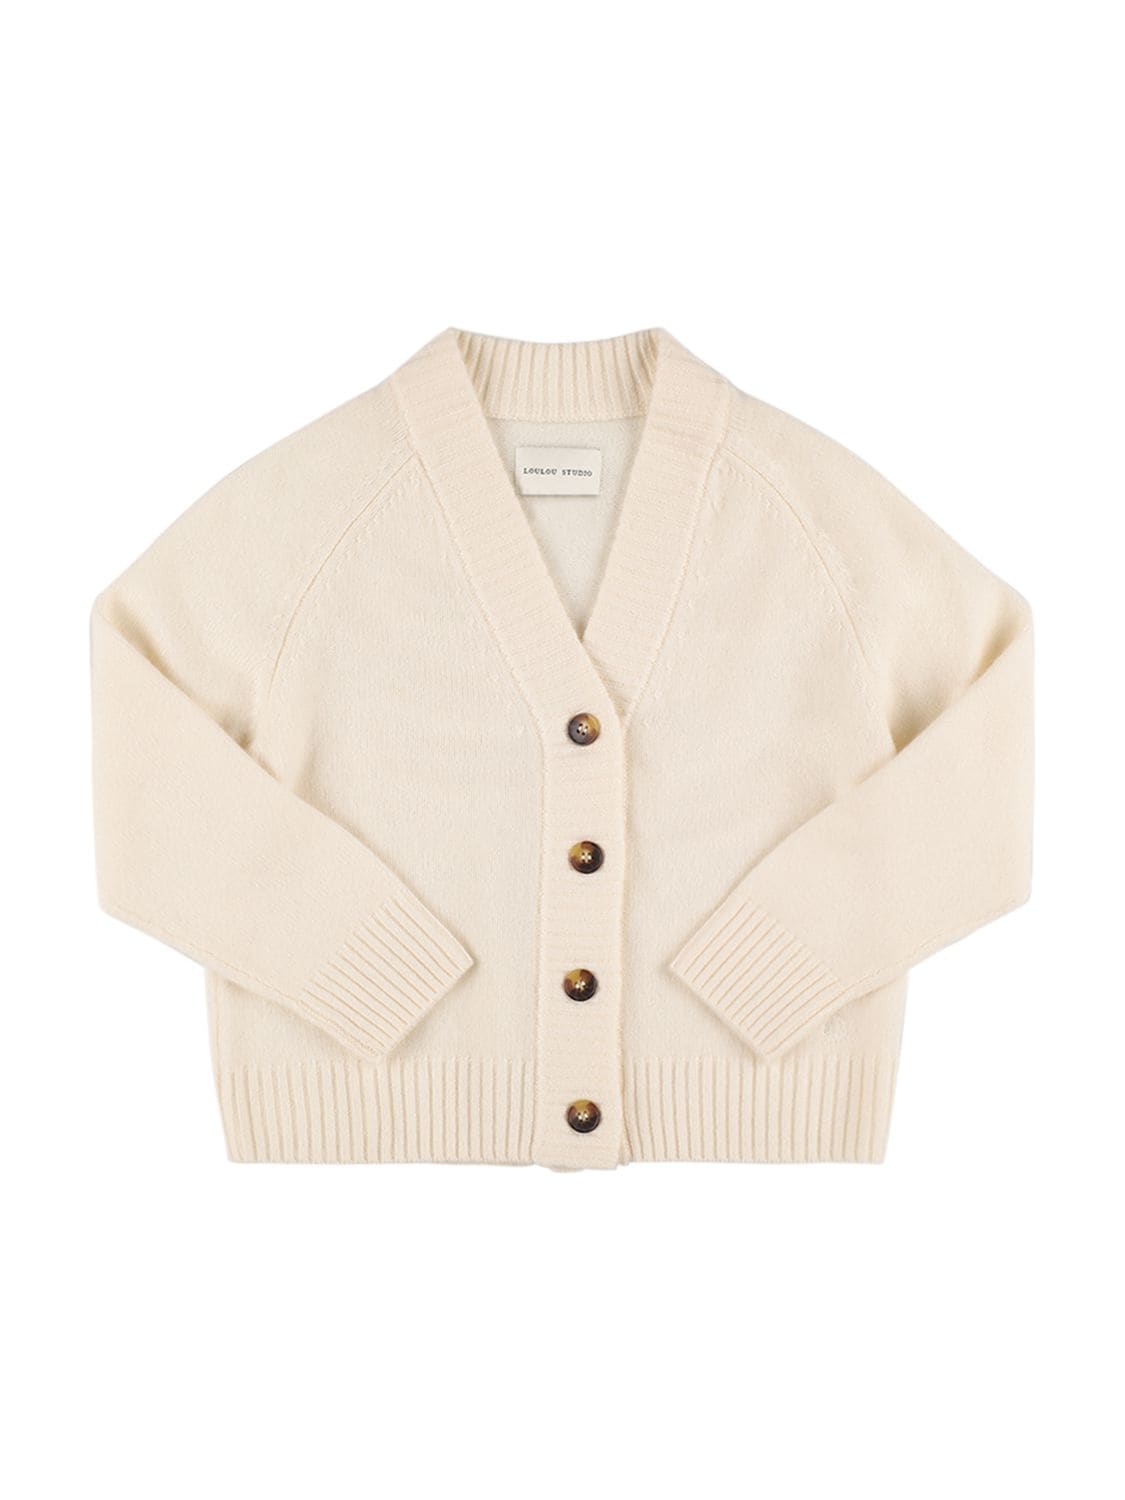 Loulou Studio Kids' Cashmere Knit Cardigan In Ivory